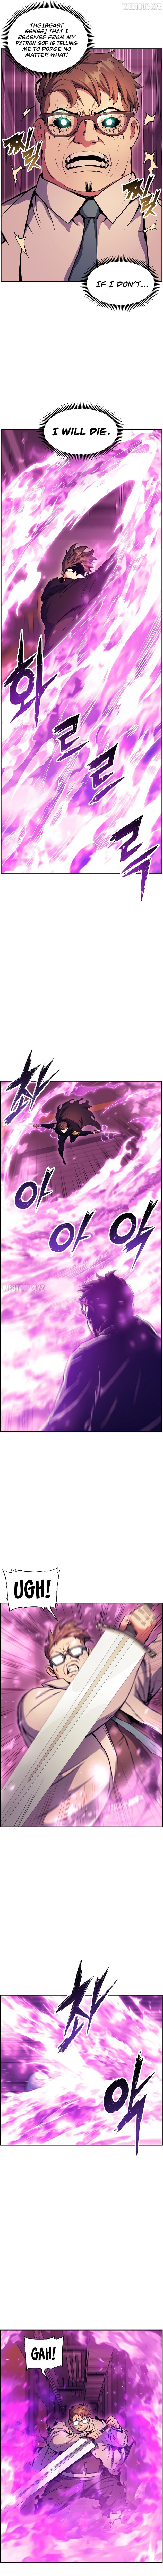 return-of-the-shattered-constellation-chap-48-5